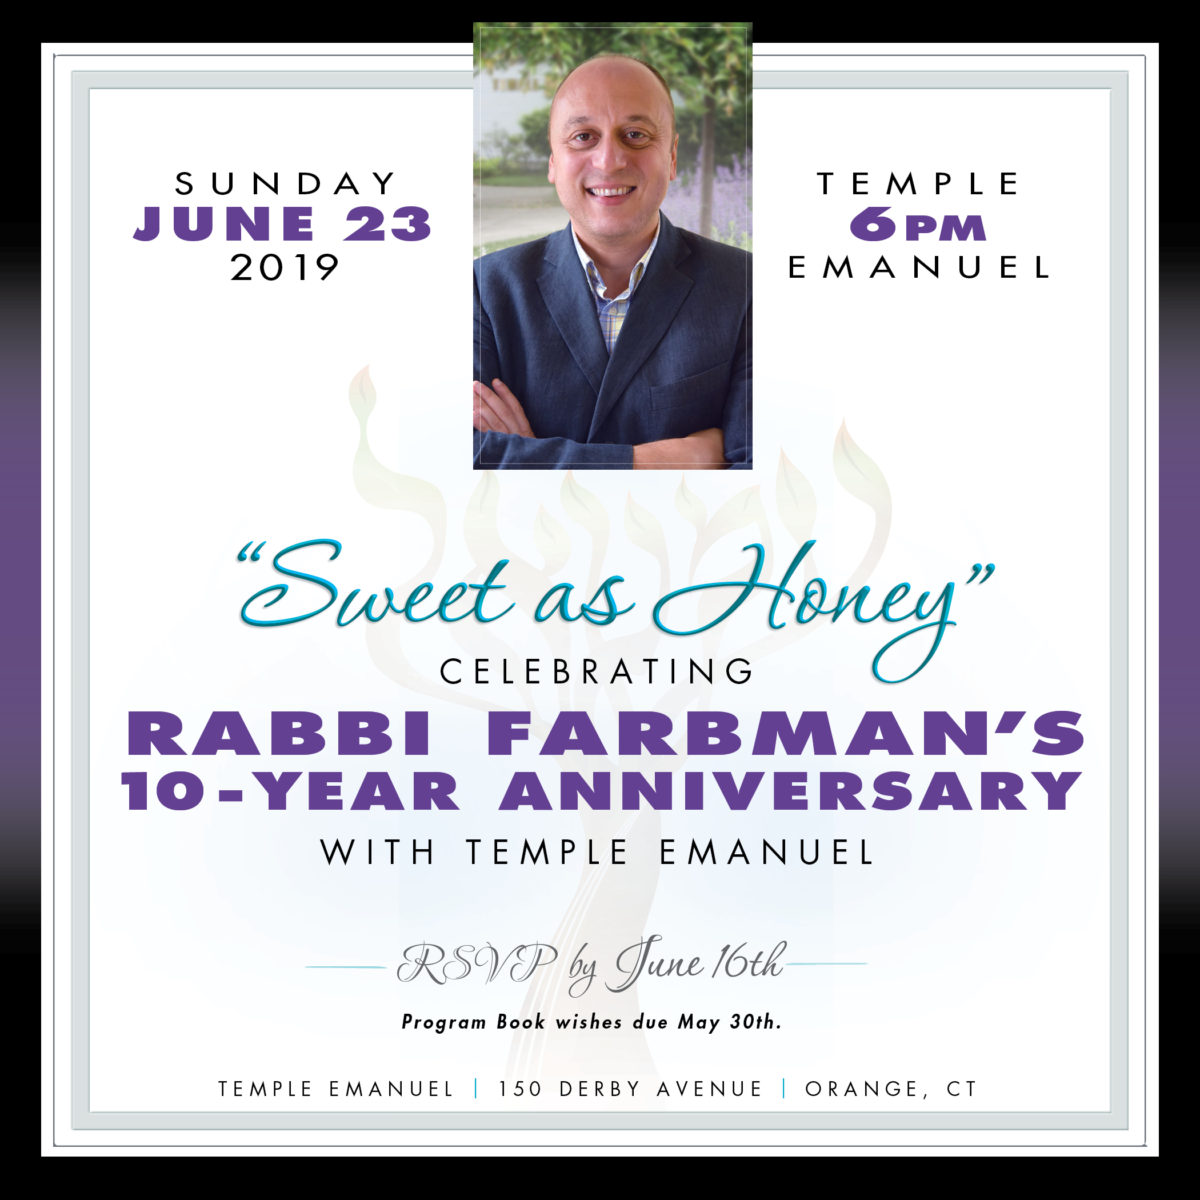 “Sweet as Honey” Celebrating Rabbi Farbman’s 10 Year Anniversary with Temple Emanuel, June 23, 2019